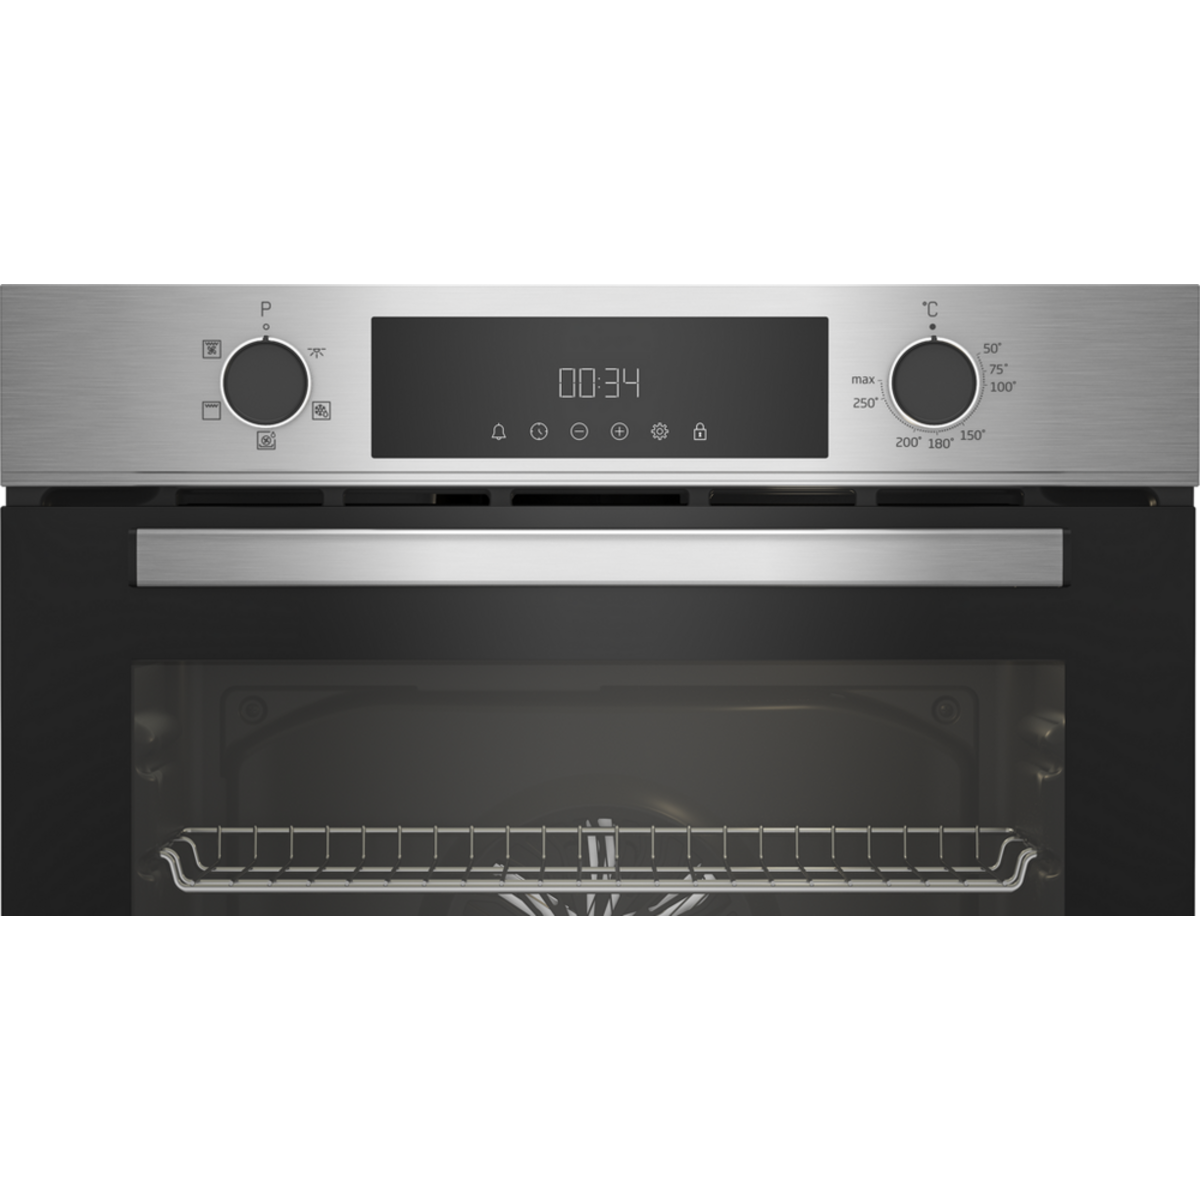 Beko CIFY81X 60cm Single Built In Electric Oven in Stainless Steel